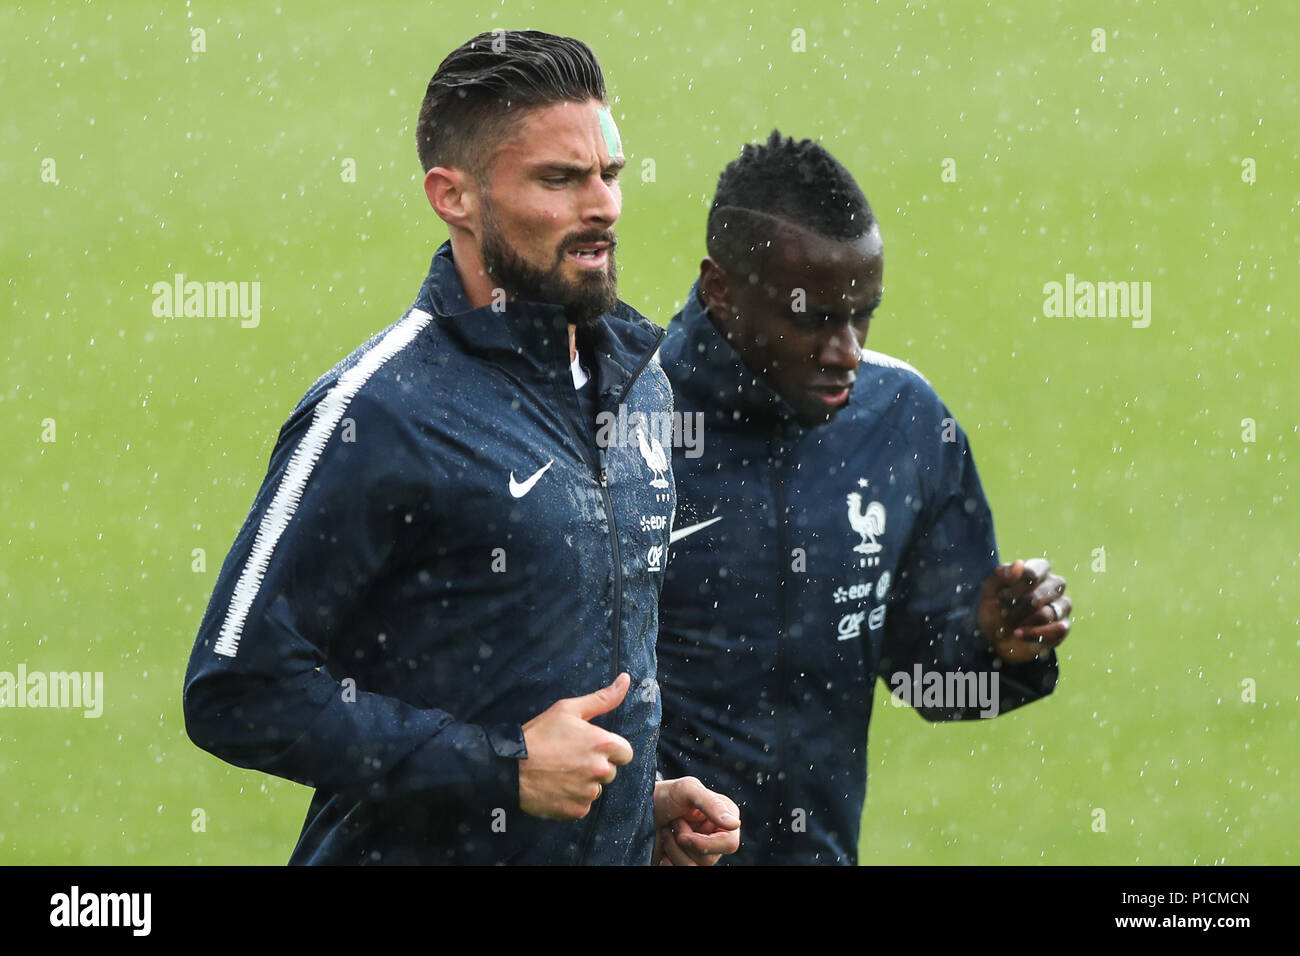 Moscow, Russia. 11th June, 2018. France's Olivier Giroud (L) attends a training session ahead of the Russia 2018 World Cup in Moscow, Russia, June 11, 2018. Credit: Wu Zhuang/Xinhua/Alamy Live News Stock Photo